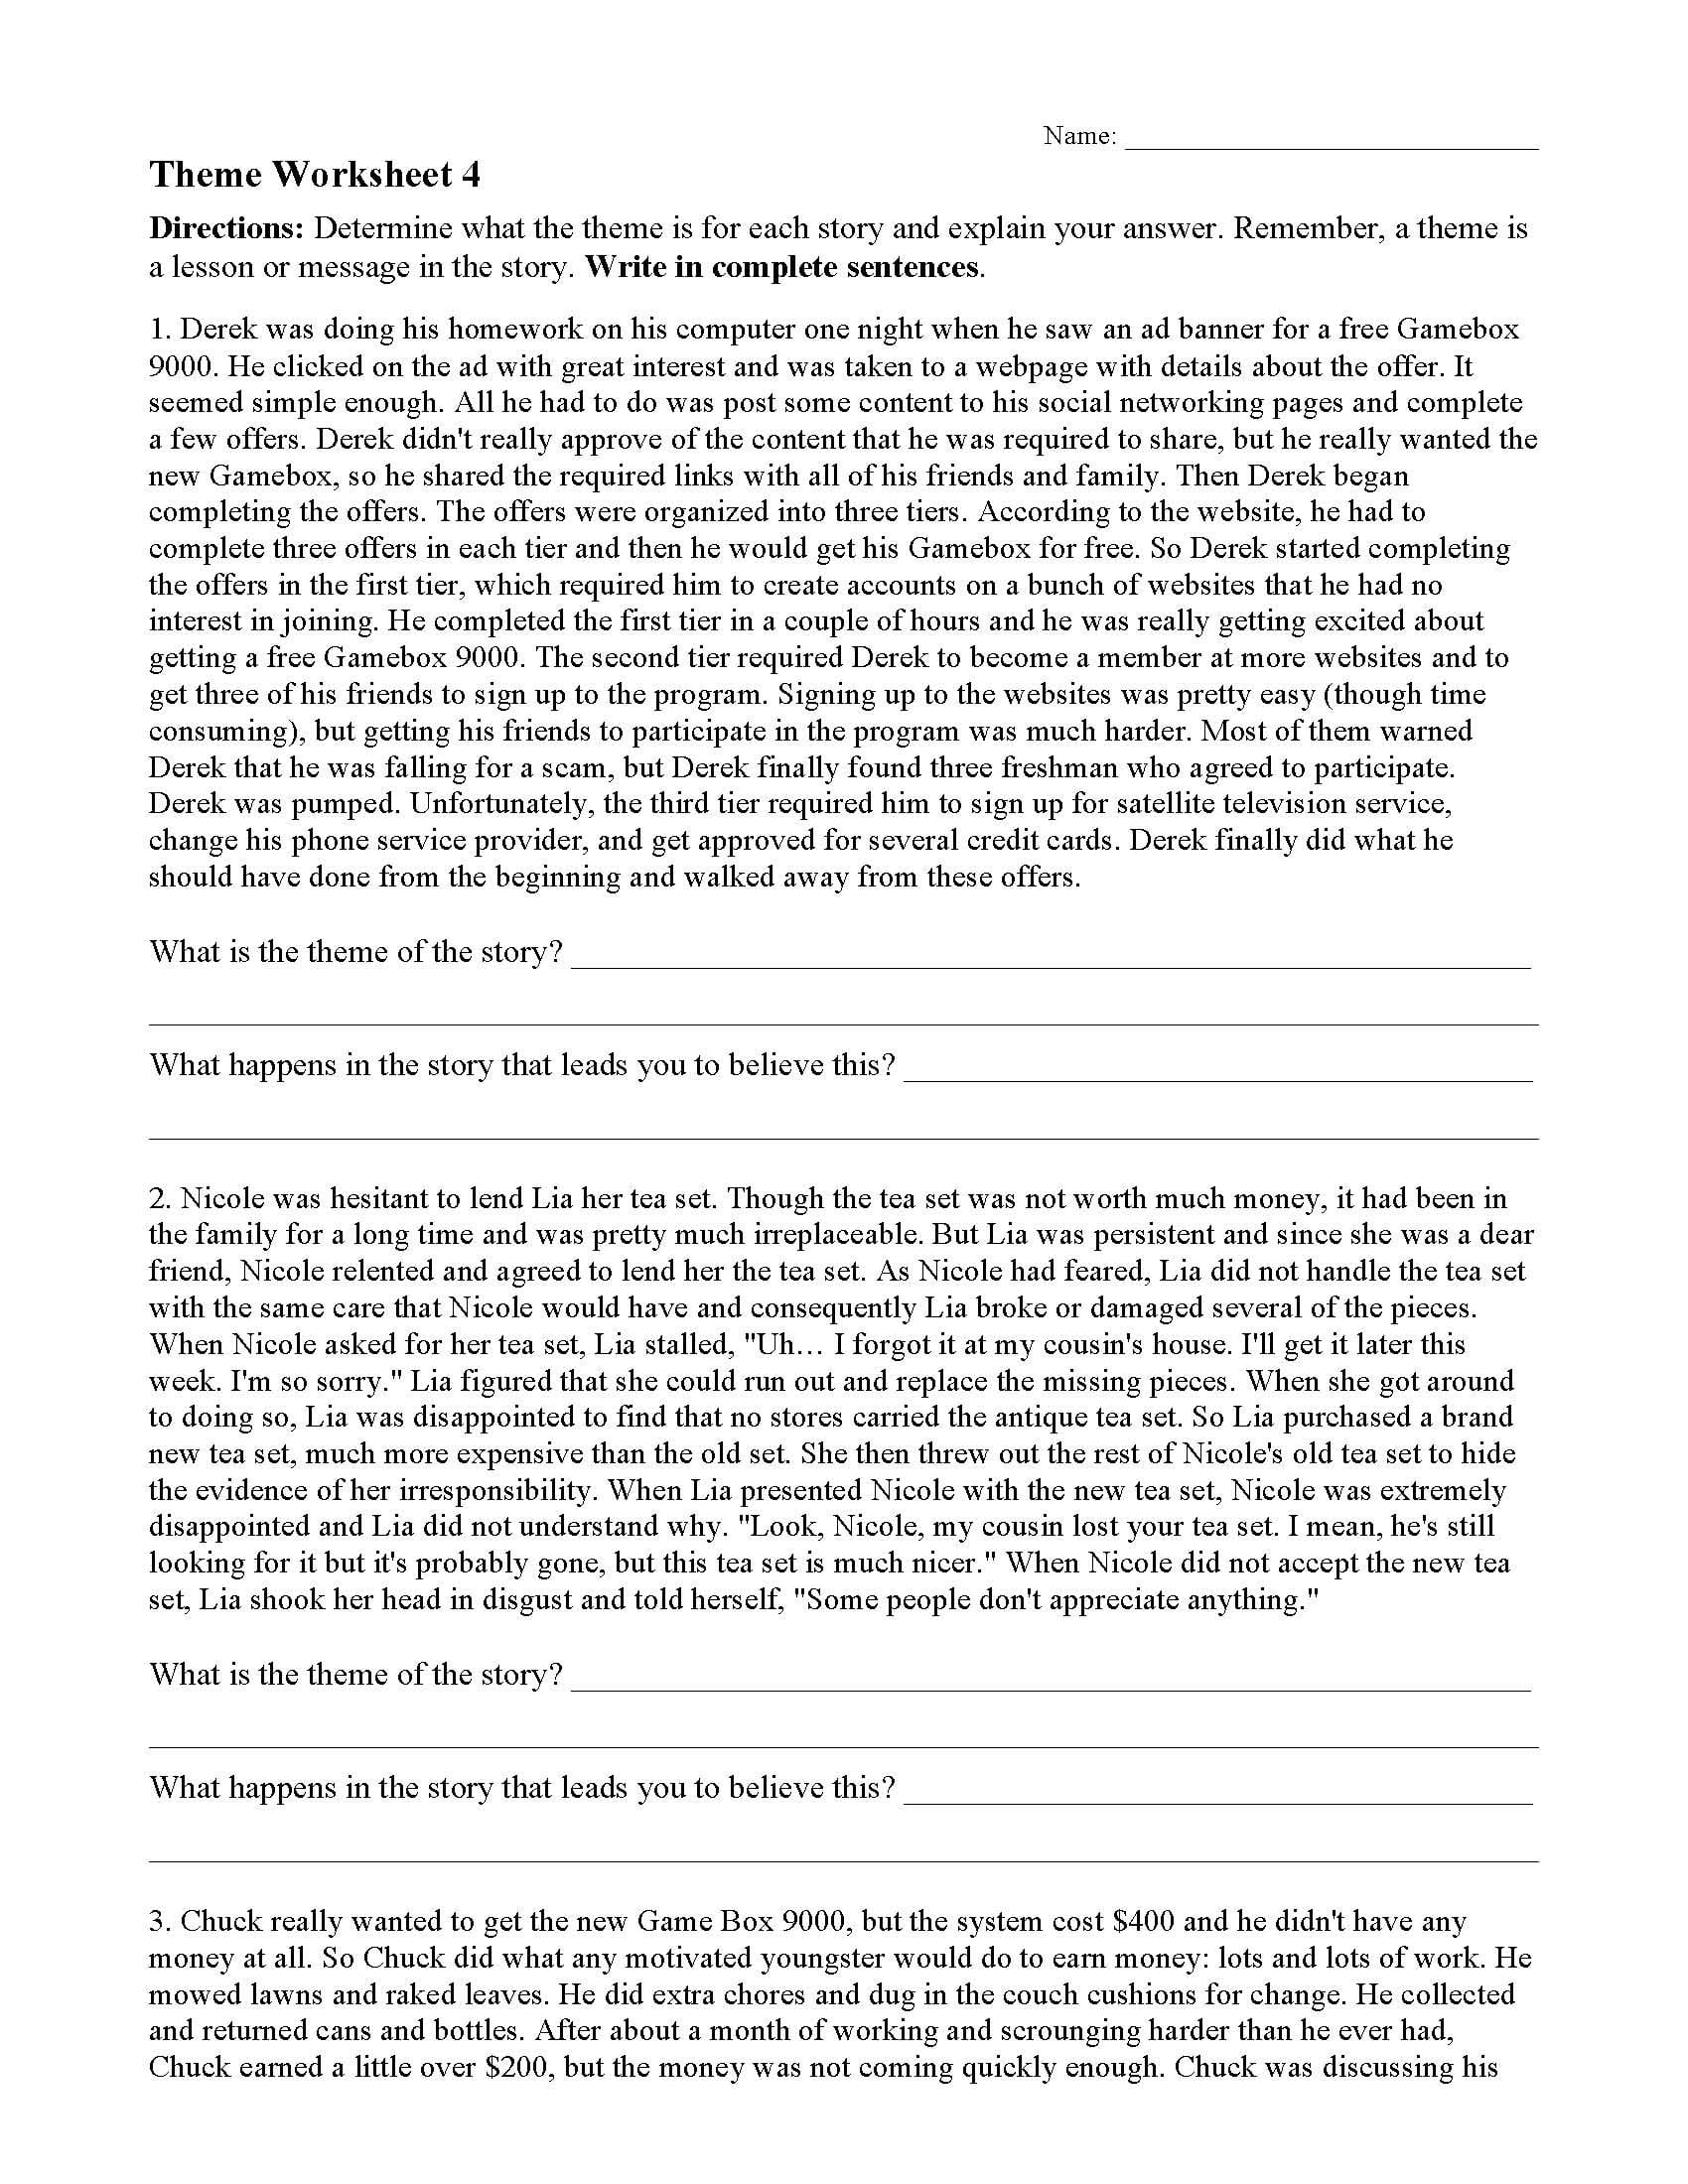 Theme Worksheet 4  Preview